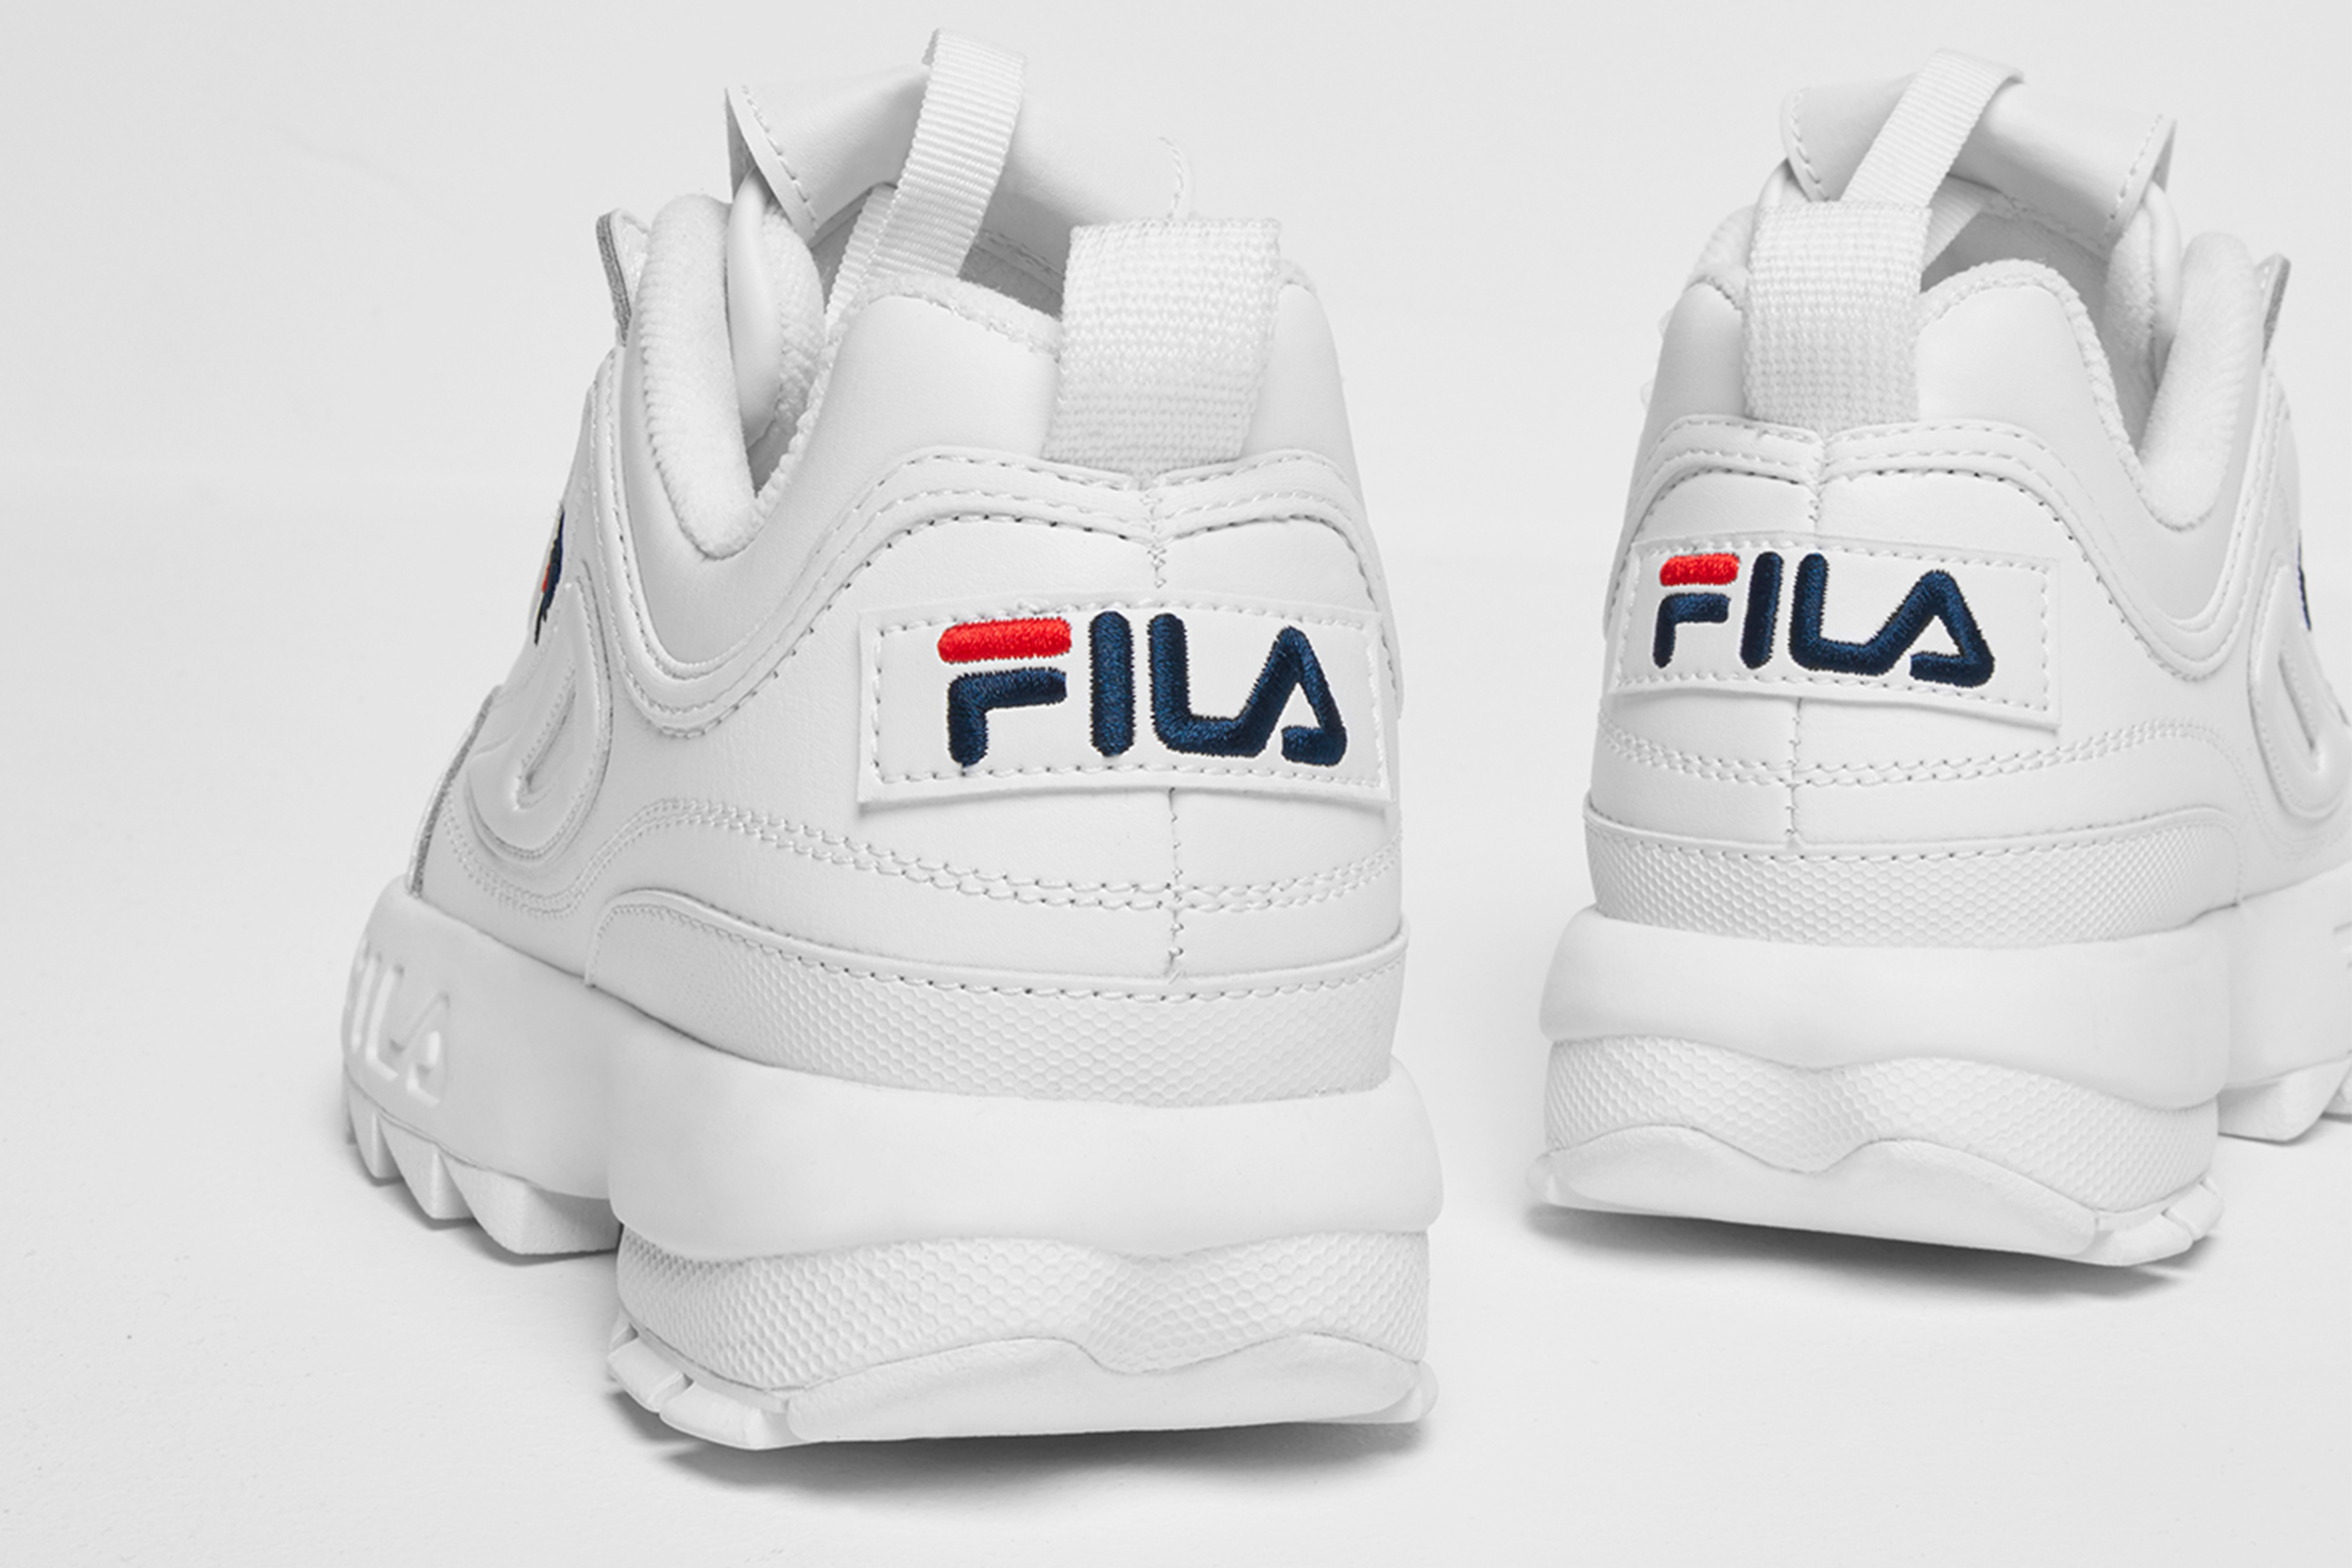 red fila boots 90s